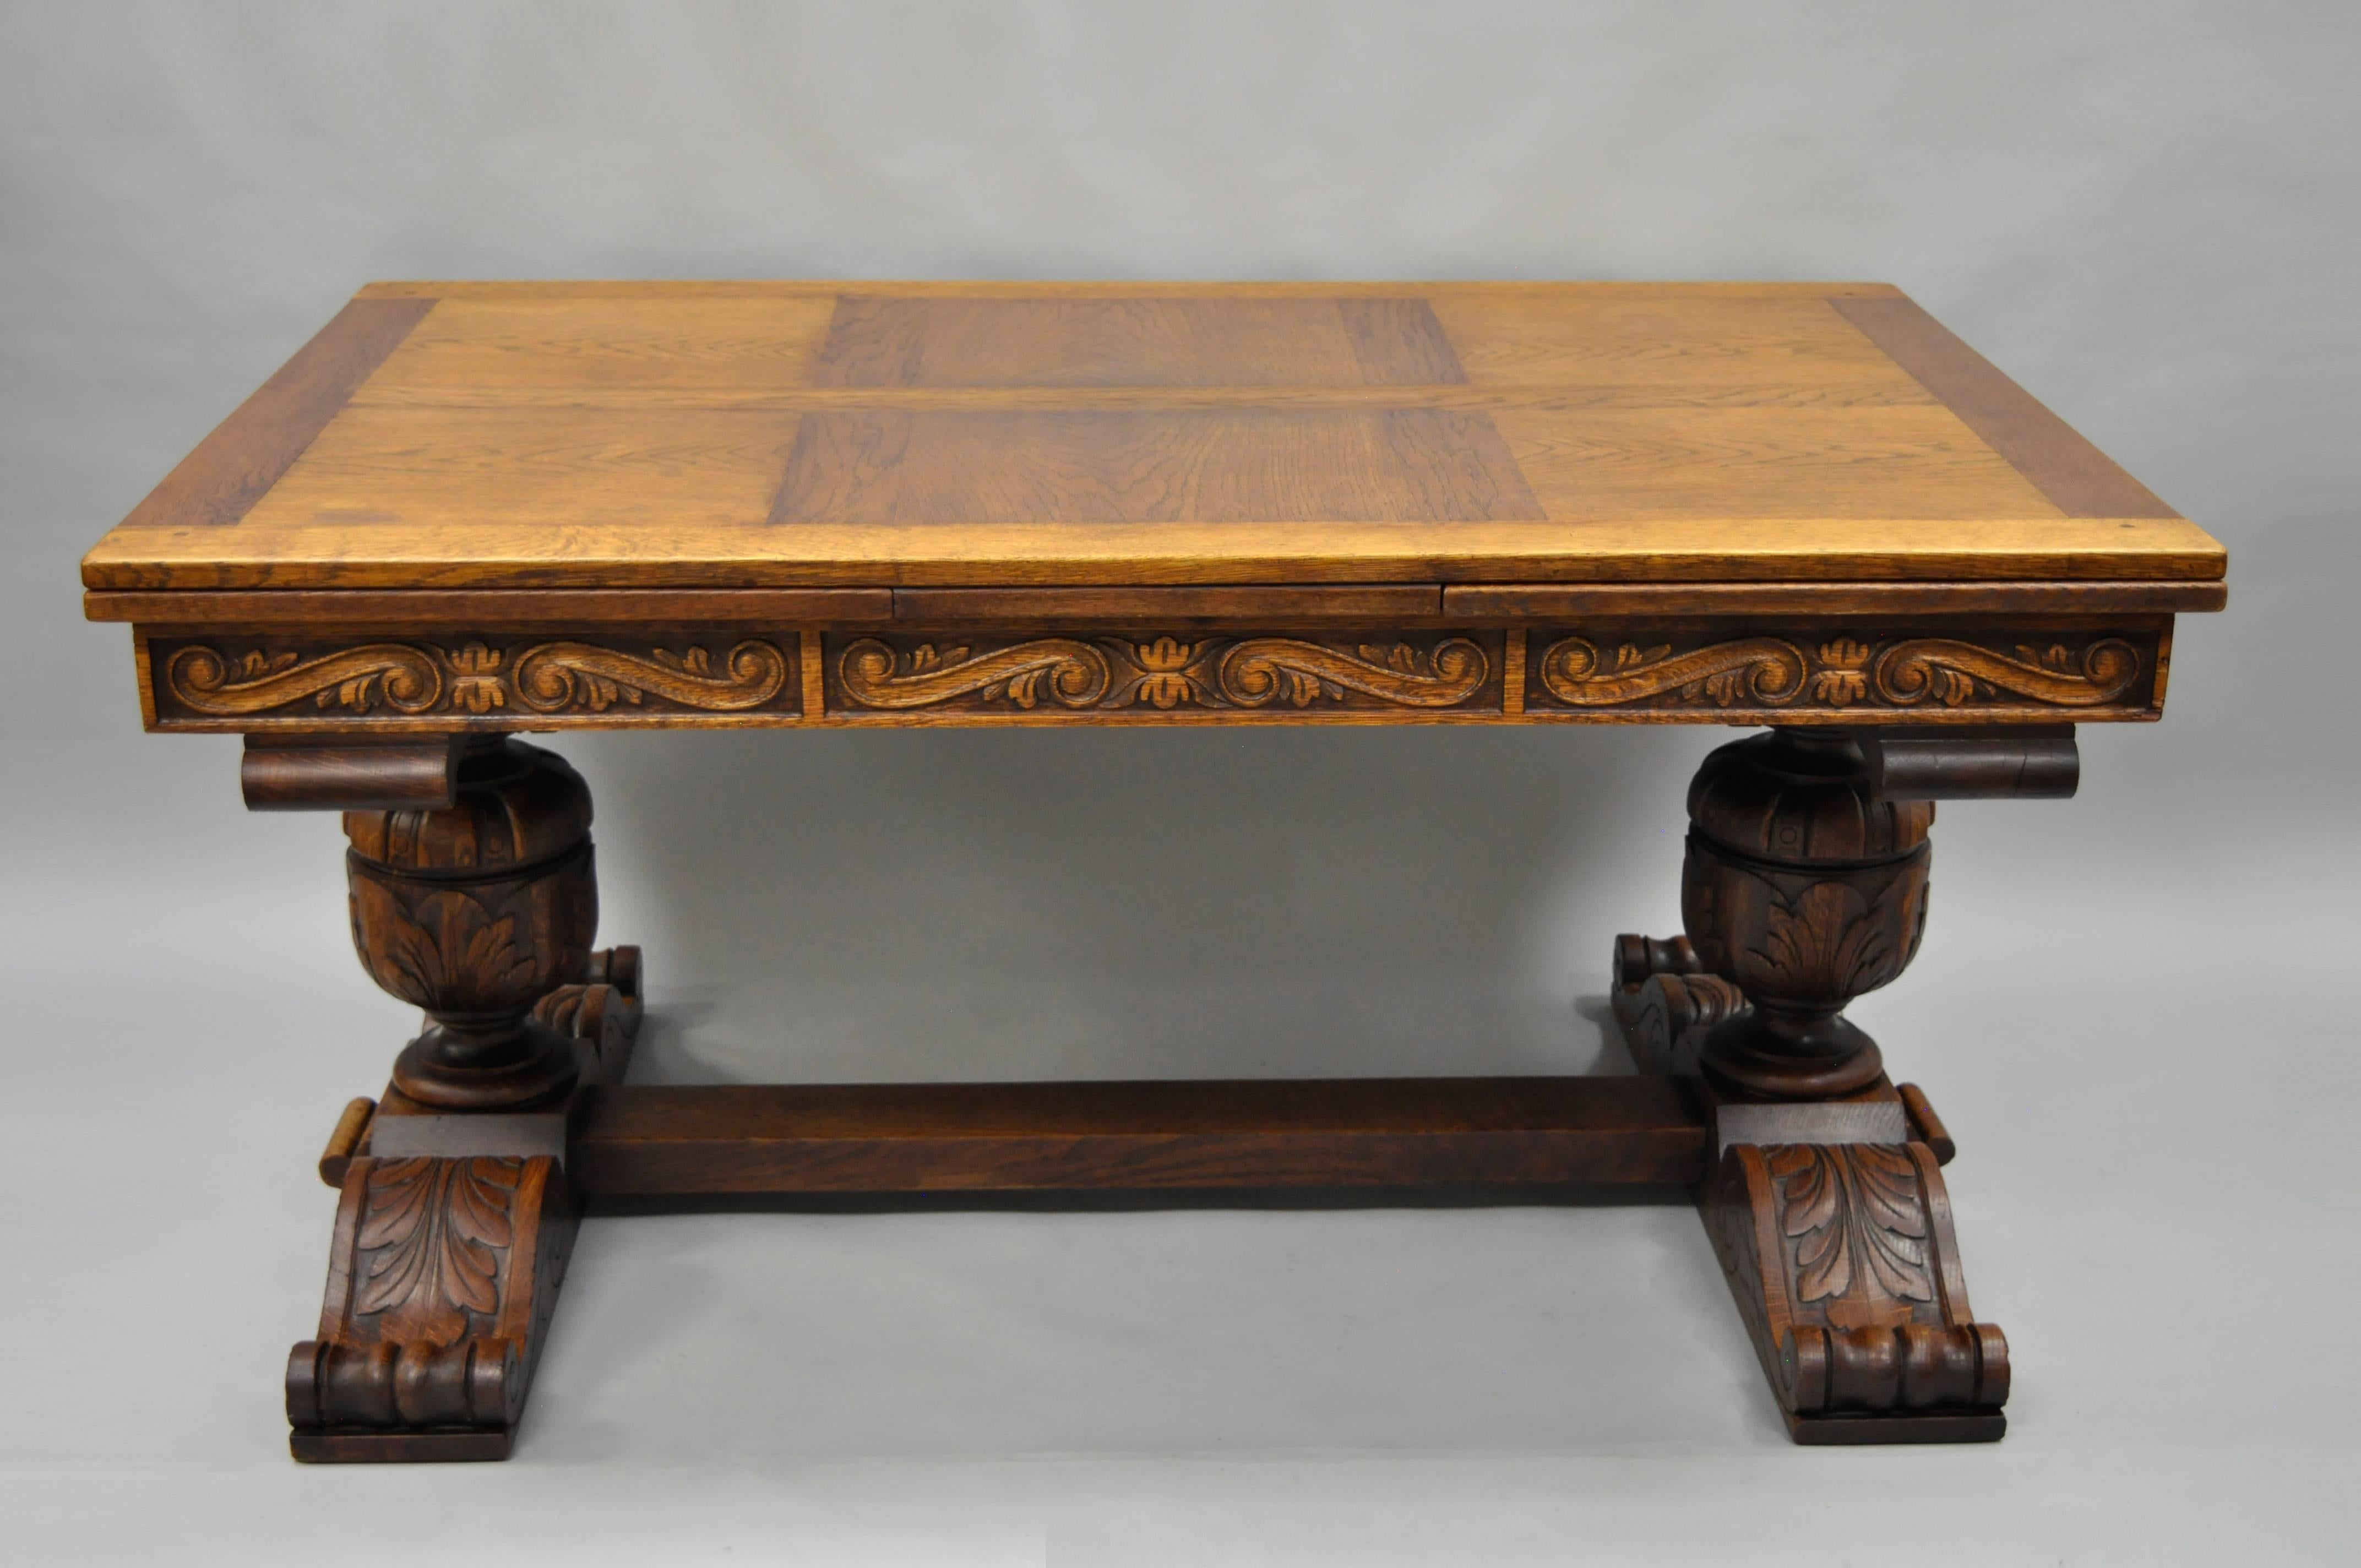 Remarkable quality solid oak wood Renaissance Revival or Jacobean Style refectory trestle base dining table. Item features a beautiful solid wood joined top with exposed wooden dowels, stunning tiger oak wood grain, substantial and finely carved